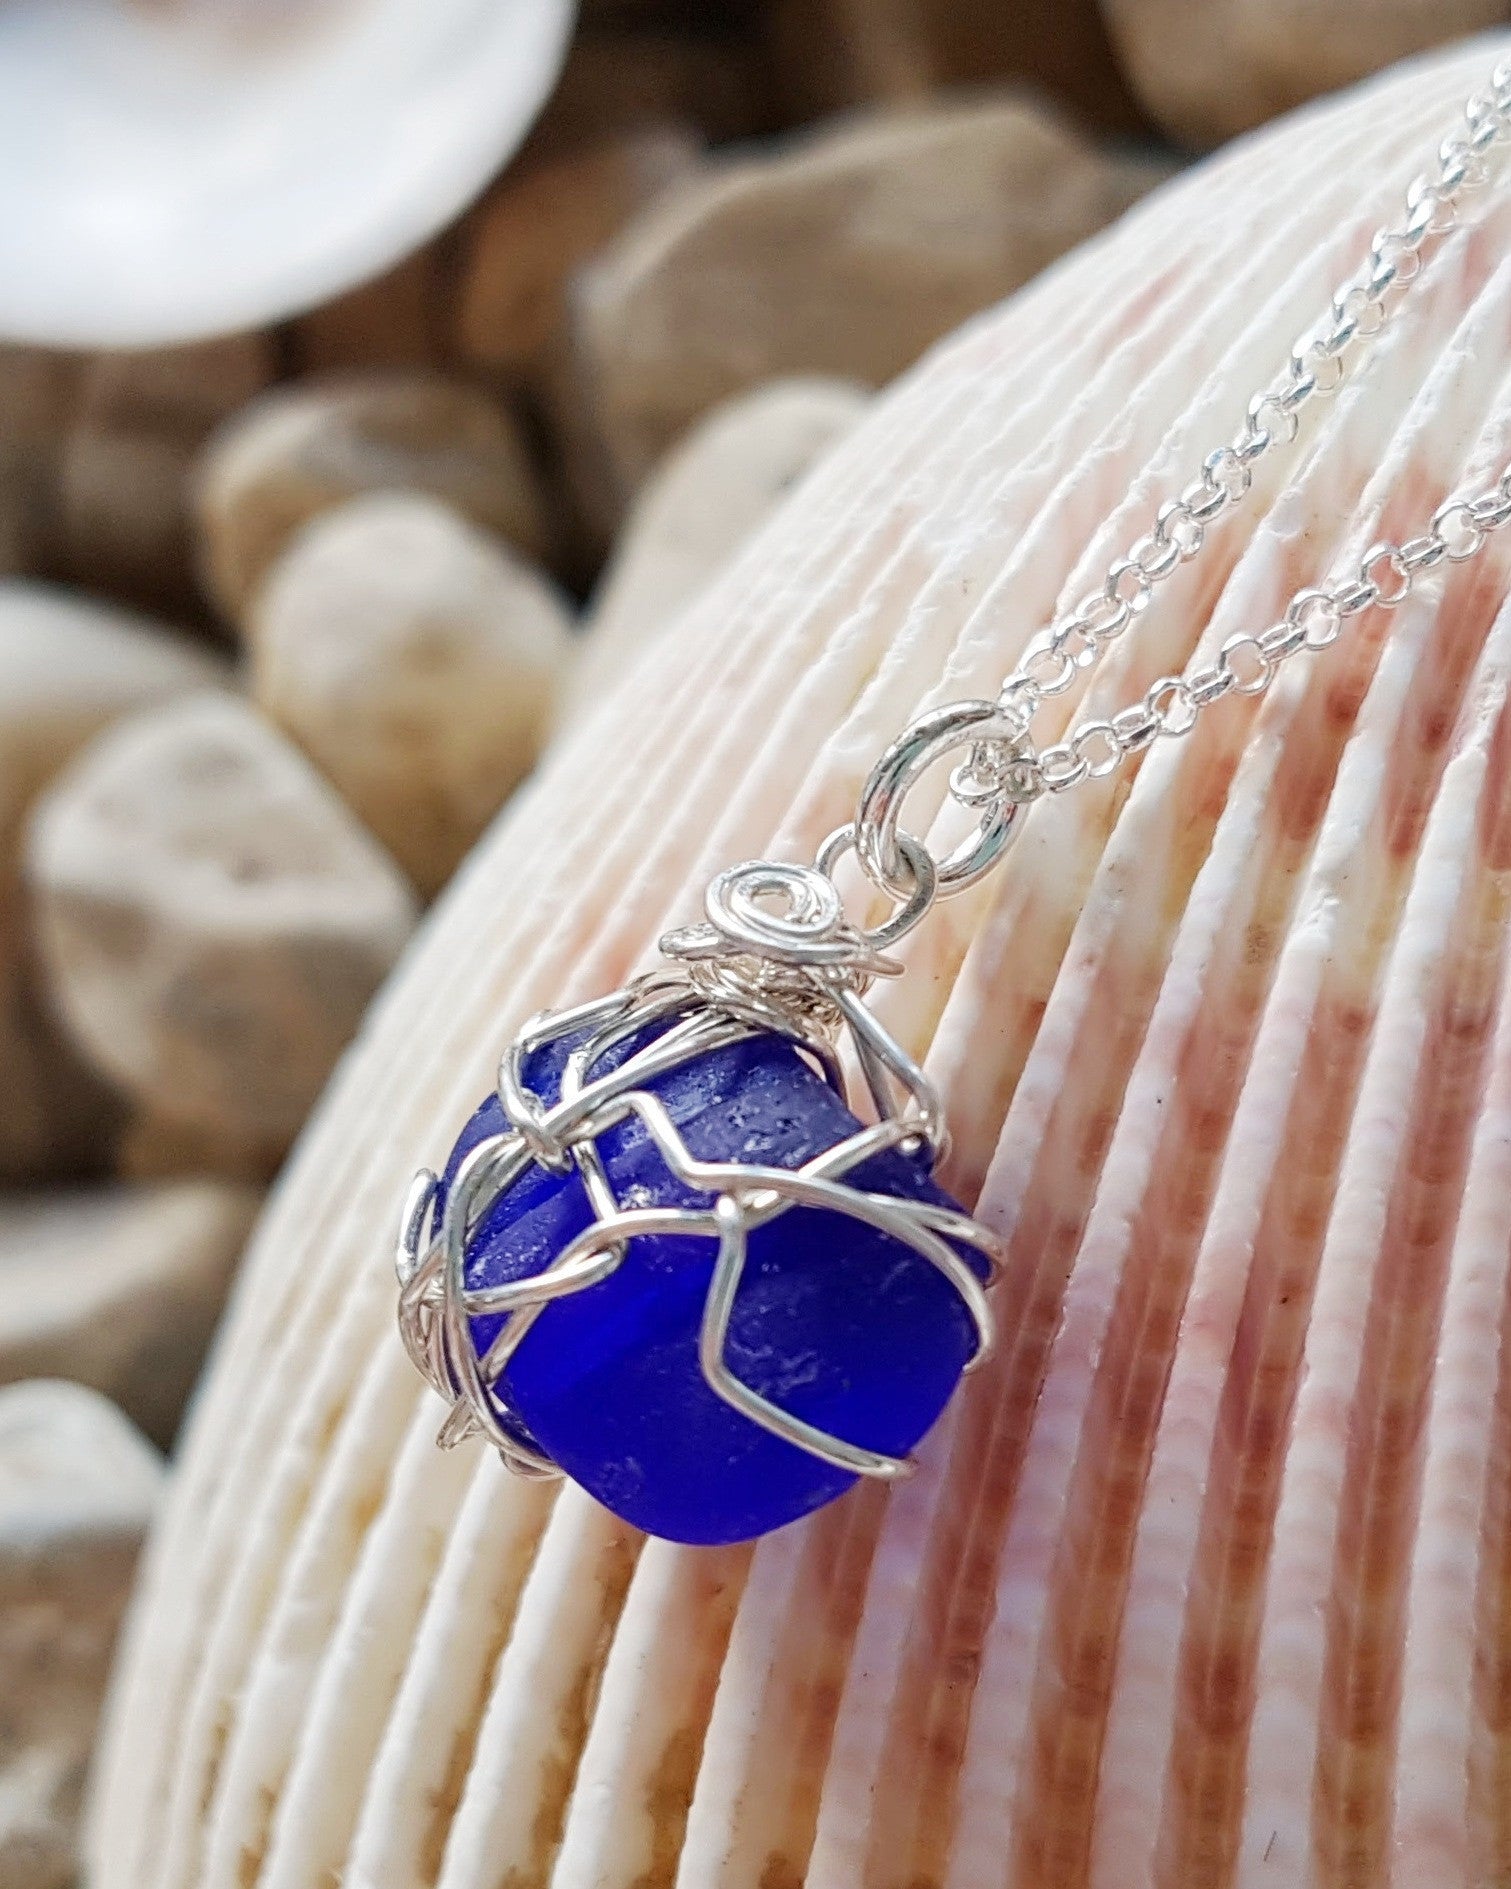 Blue Passion Sea Glass, Lake Glass-Bach GlassSapphire Blue Passion Beach Glass Pendant Necklace, Sterling Silver wire wrapped blue beach glass pendant on rolo style chain. Displayed on shell